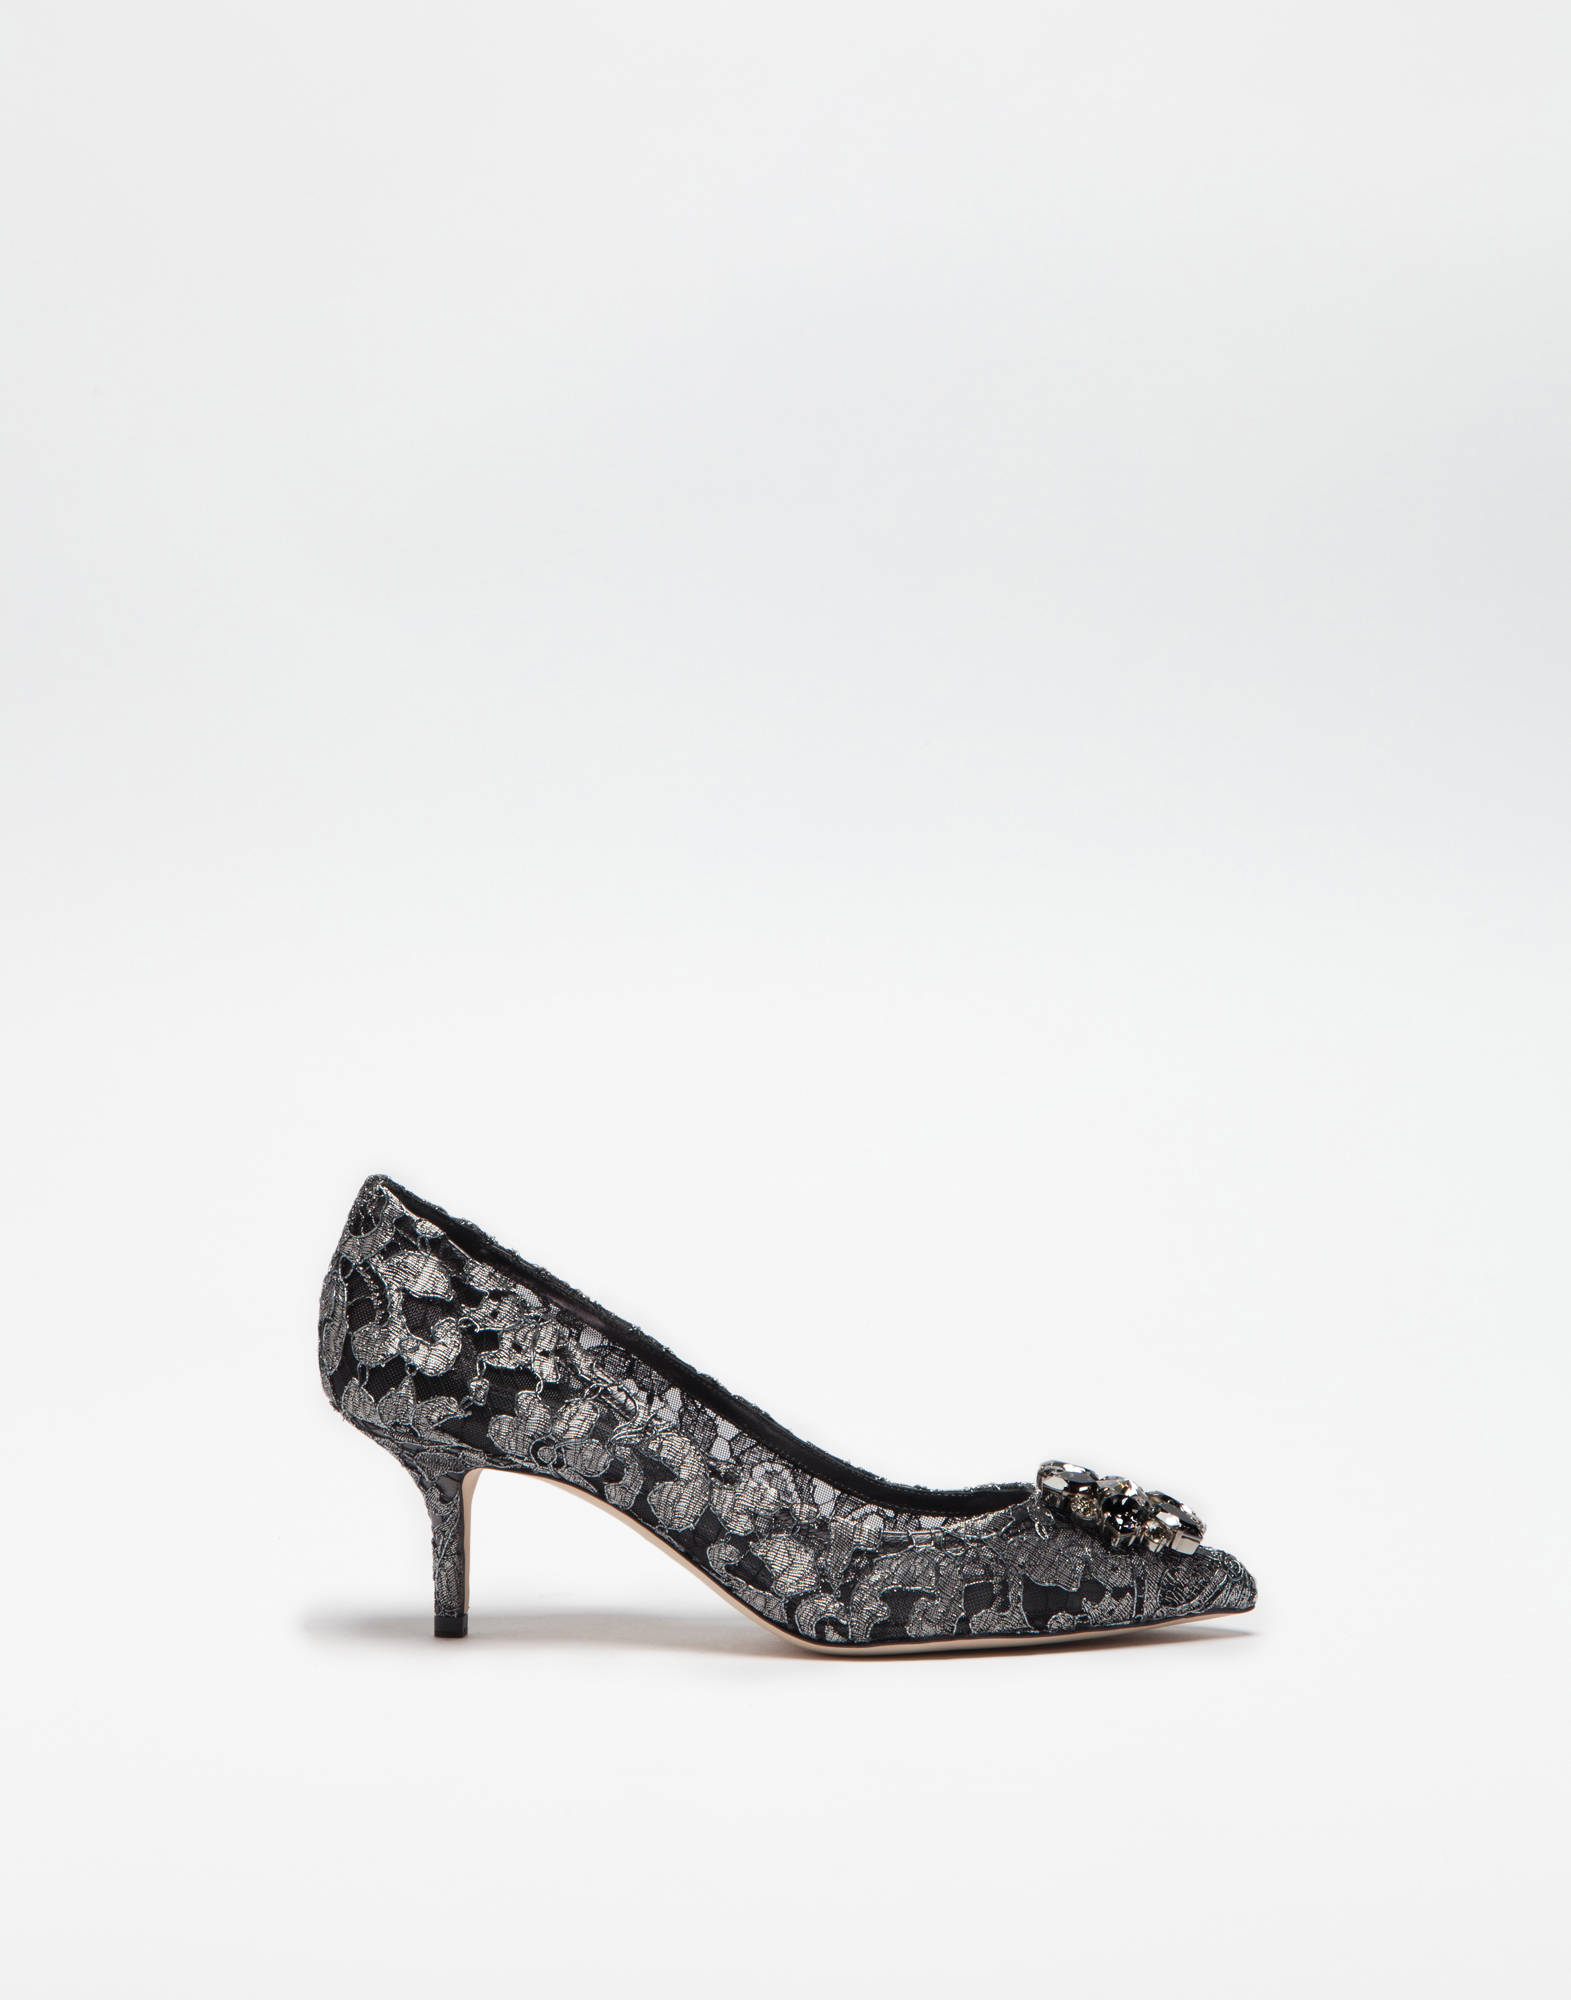 Lurex lace rainbow pumps with brooch detailing in Grey